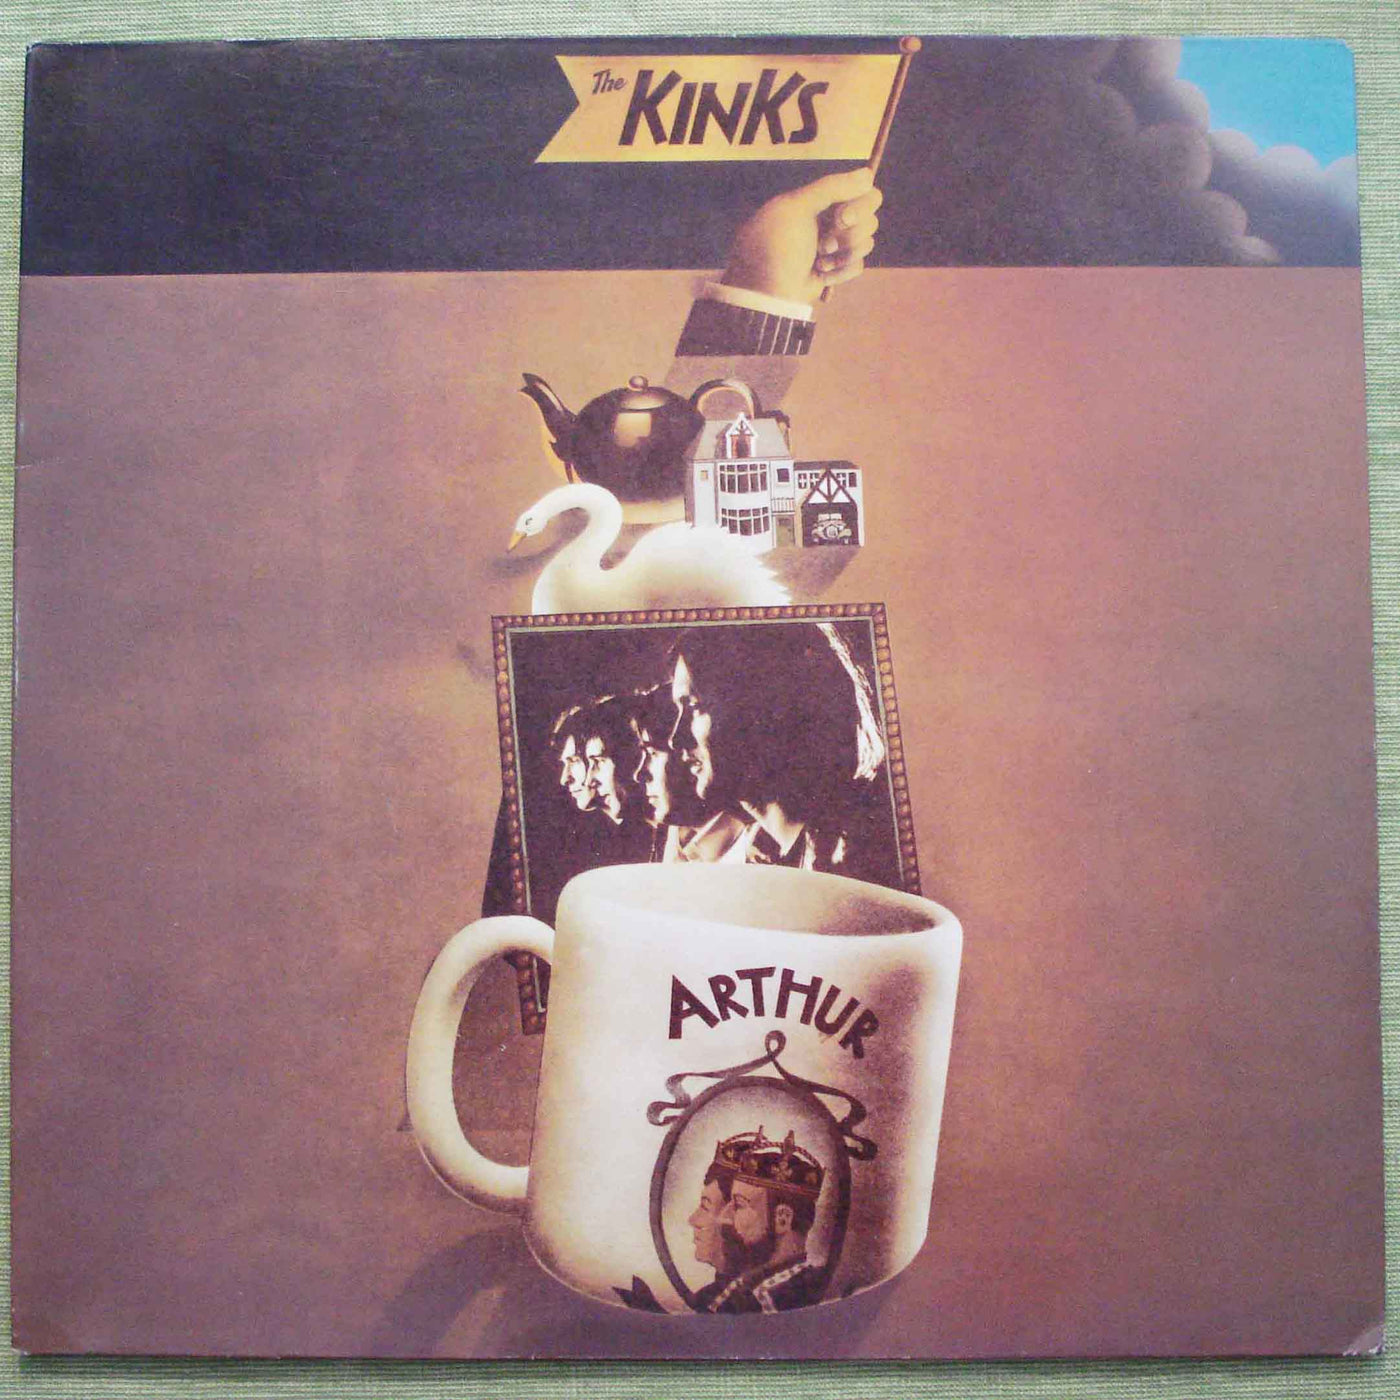 The Kinks - Arthur (Or the Decline and Fall of the British Empire) (1969) Vinyl LP 33rpm PYL-6009